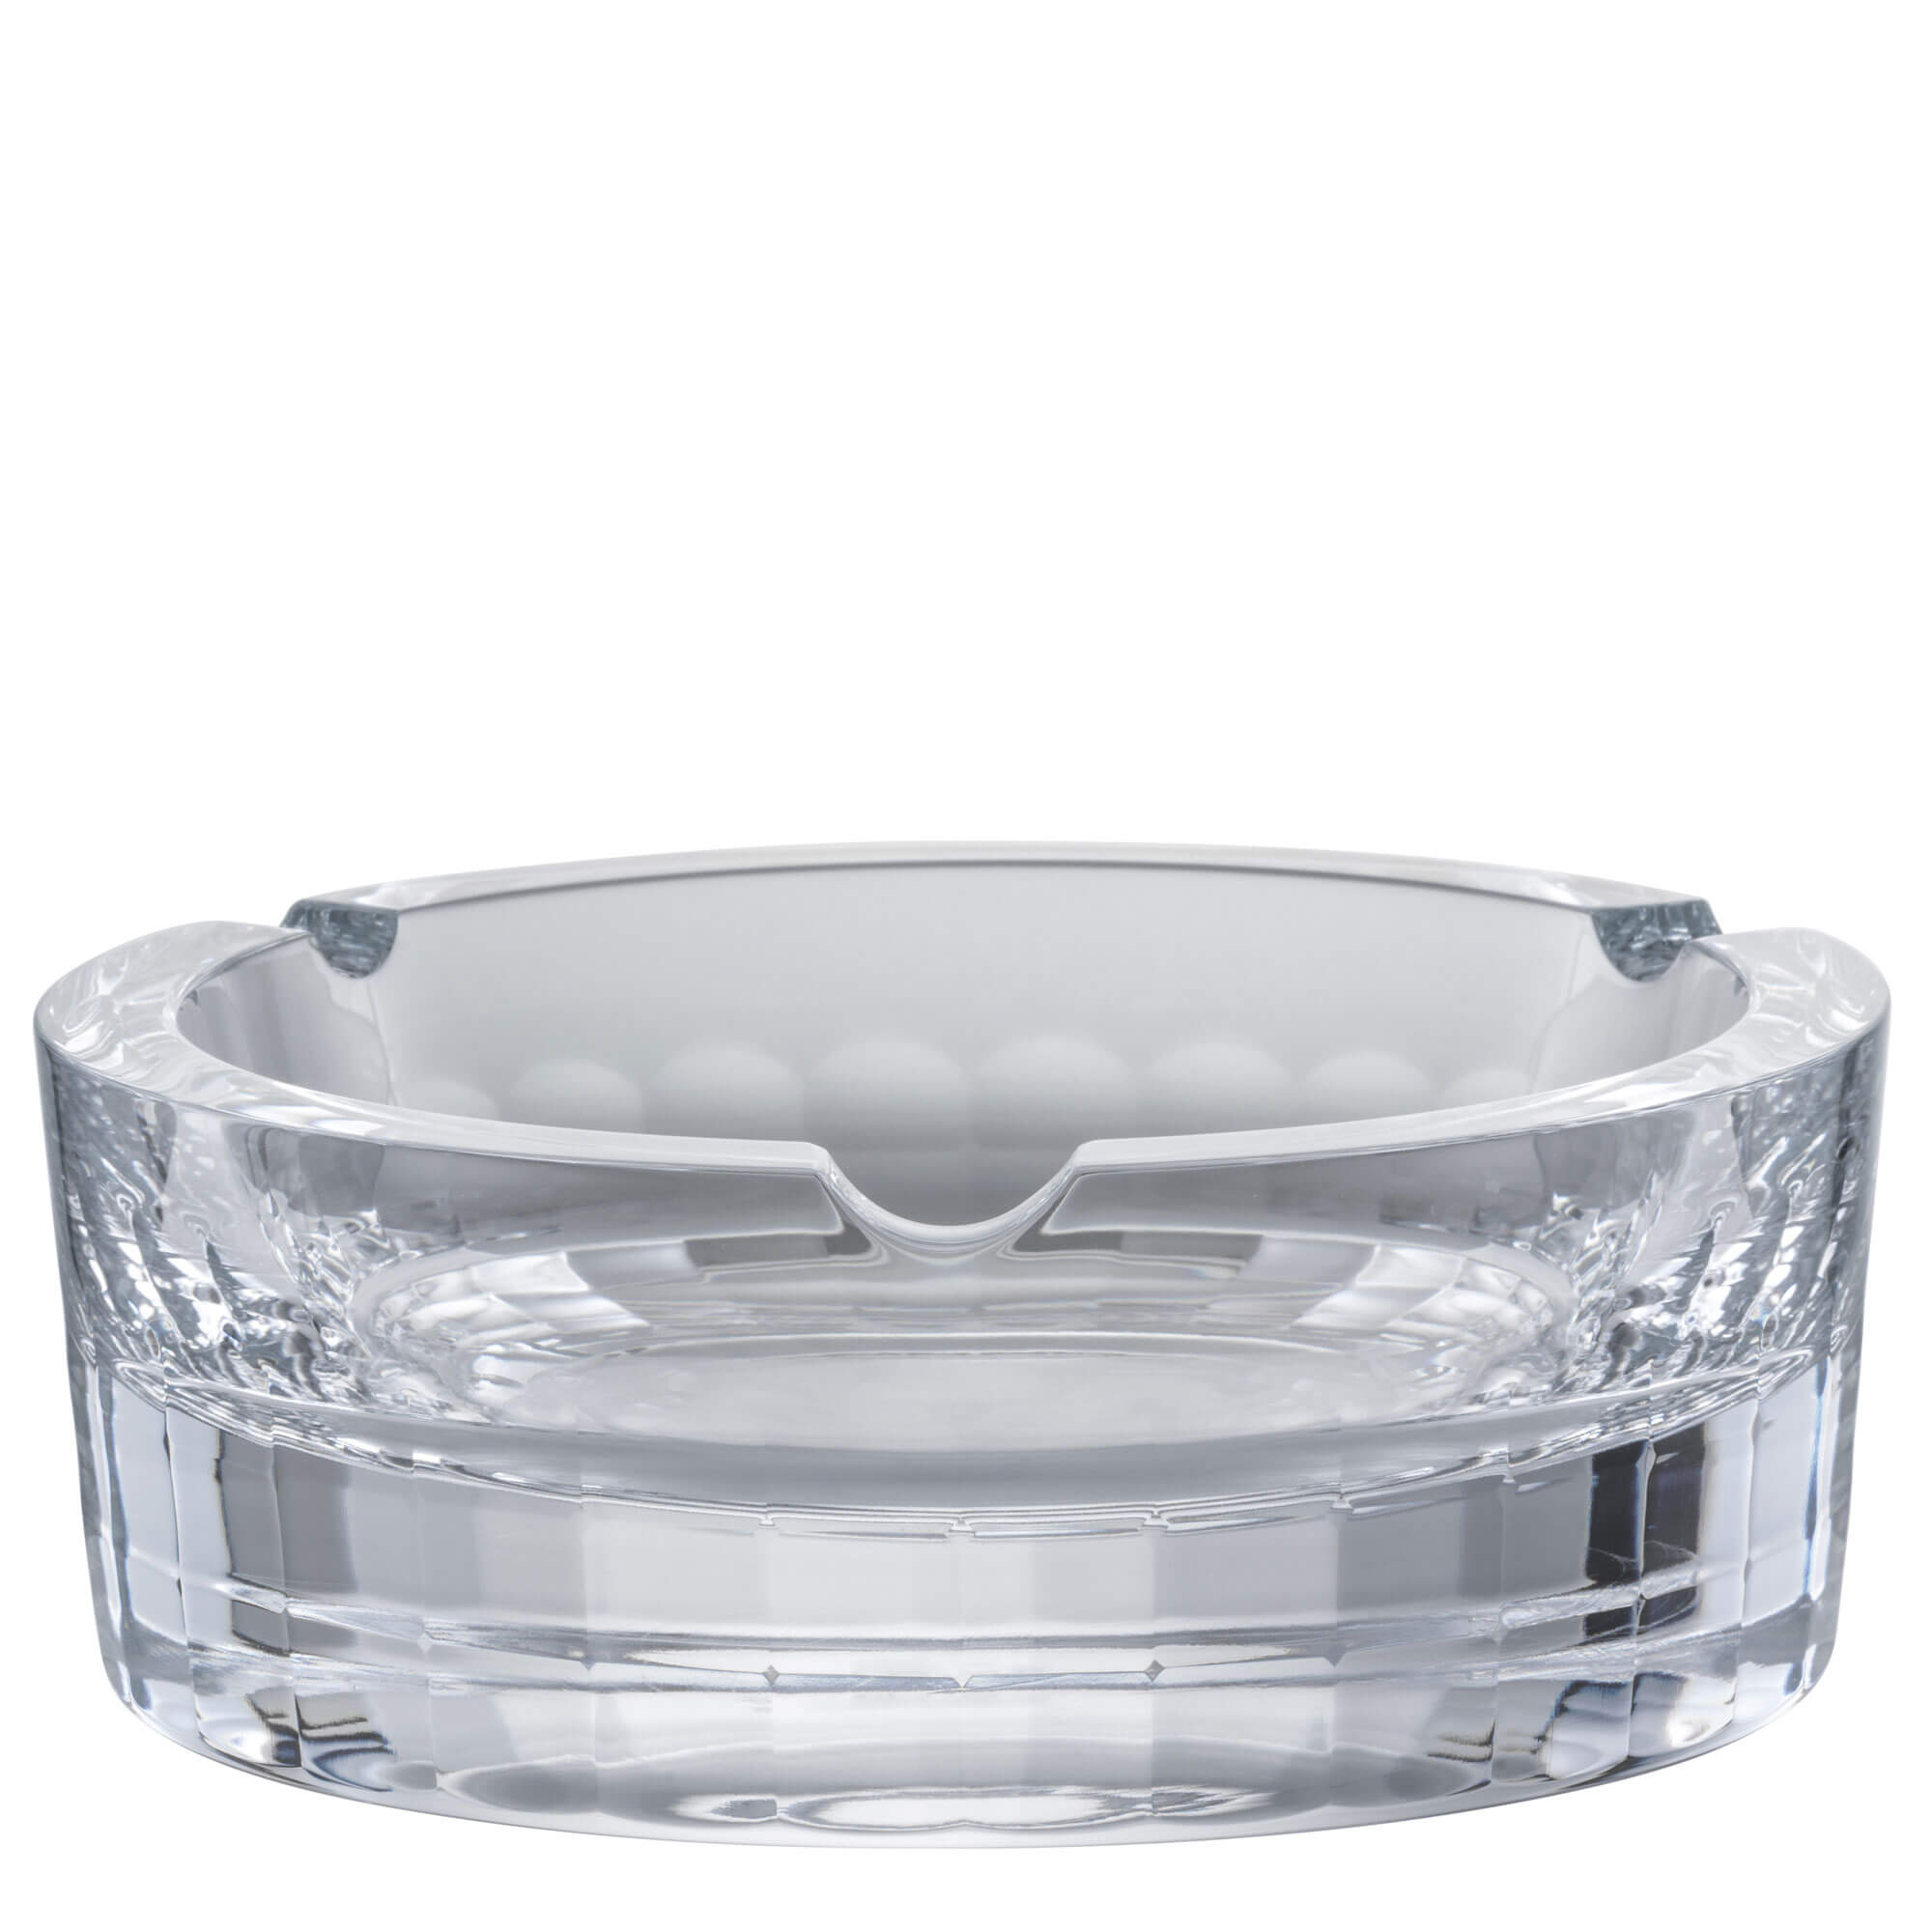 Ashtray Hommage Carat, Zwiesel Glas - 147mm (1 pc.)